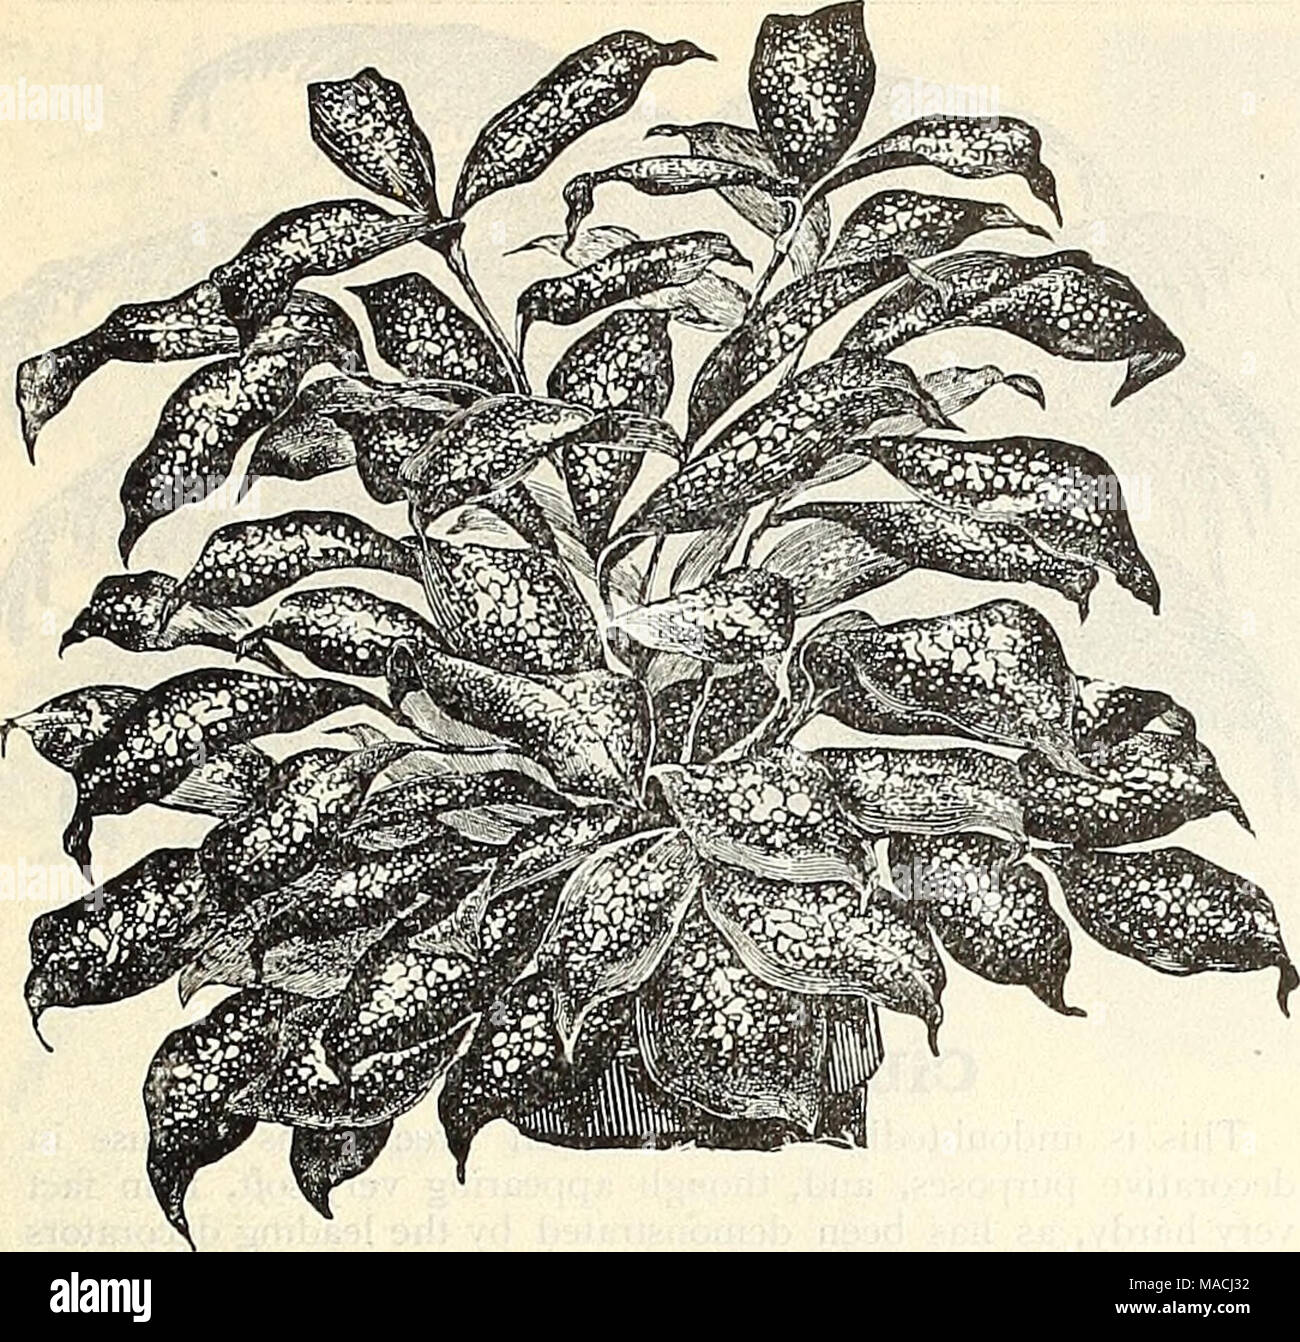 . Dreer's wholesale price list for 1901 : flower seeds, bulbs, aquatics, plants vegetable seeds, tools, implements, fertilizers, etc., etc . DEACiENA GODSEFFIANA. Dracaena God8e£B.ana. Undoubtedly one of the most striking ornamental foliage plants of recent introduction. The plant is of an entirely diffei- ent habit and appearance from all other Dracsenas. It is ofj fi-ee-branching habit, and throws out many suckers from the] base so as to form beautiful, compact, graceful specimens in a' very short time. Its foliage is broadly lanceolate, 5 to 6 inches long, and 2 to 3 inches wide, of a stron Stock Photo